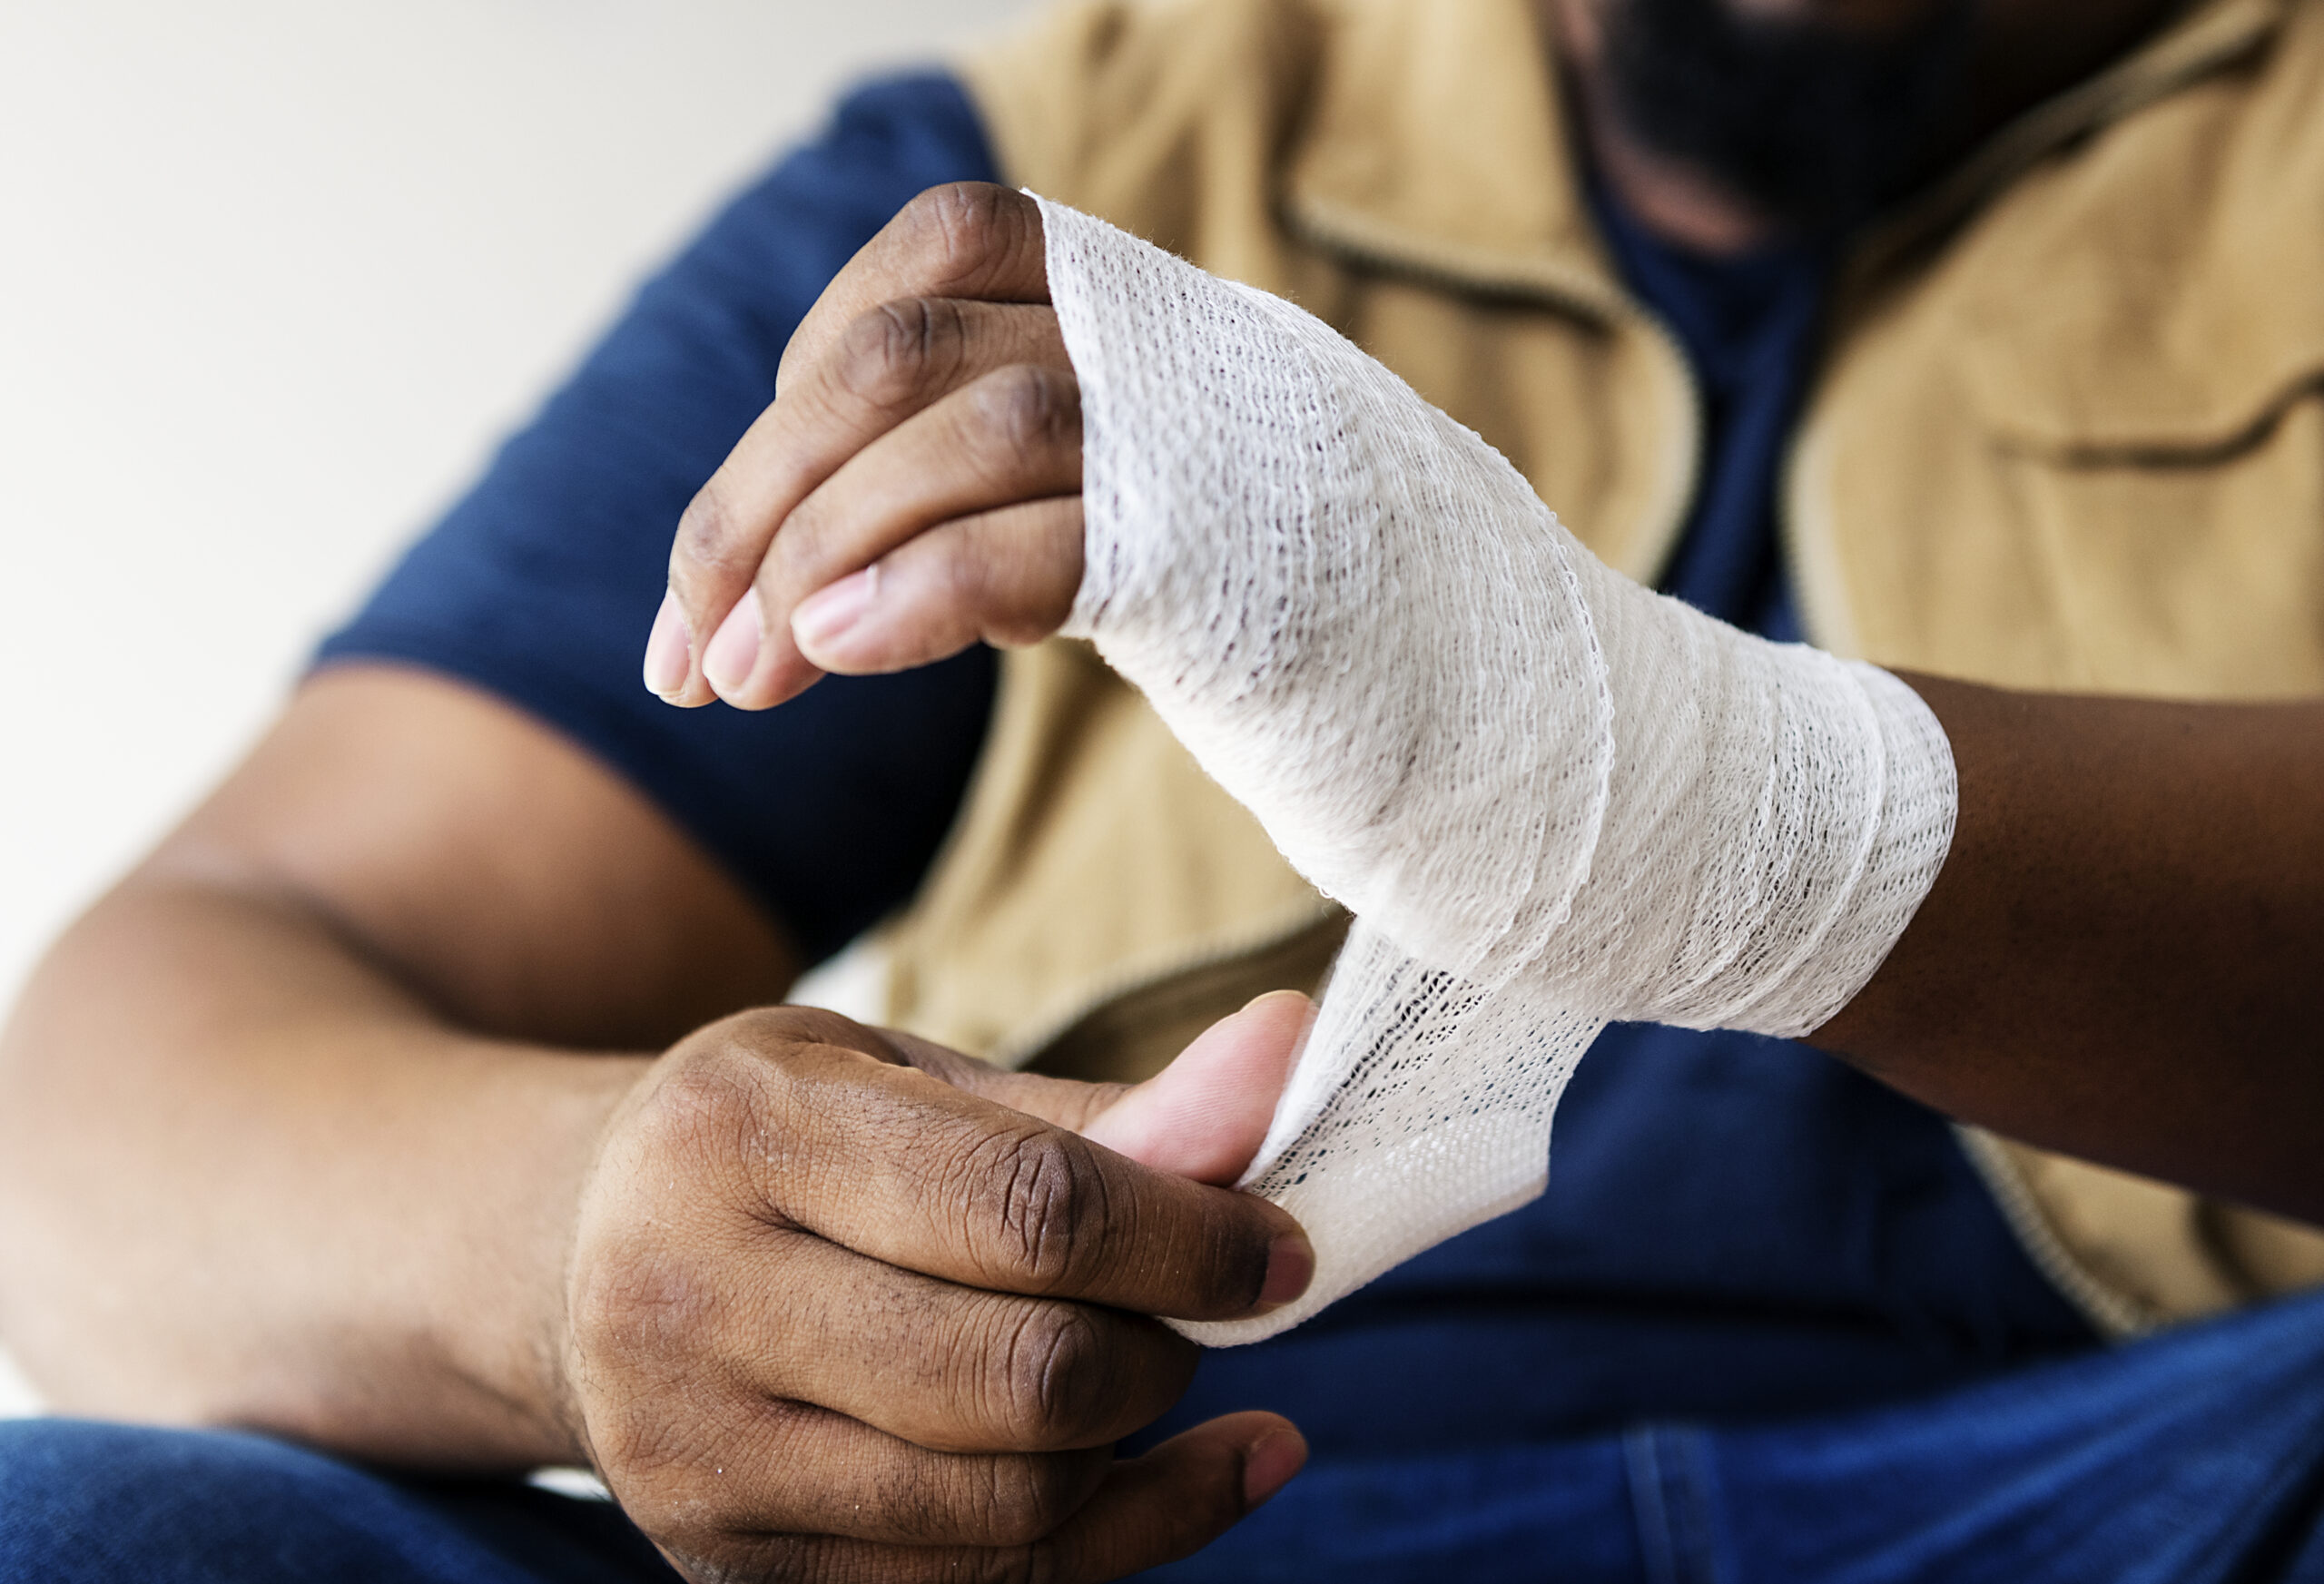 Obtaining workers' compensation benefits is difficult without a workers' comp attorney